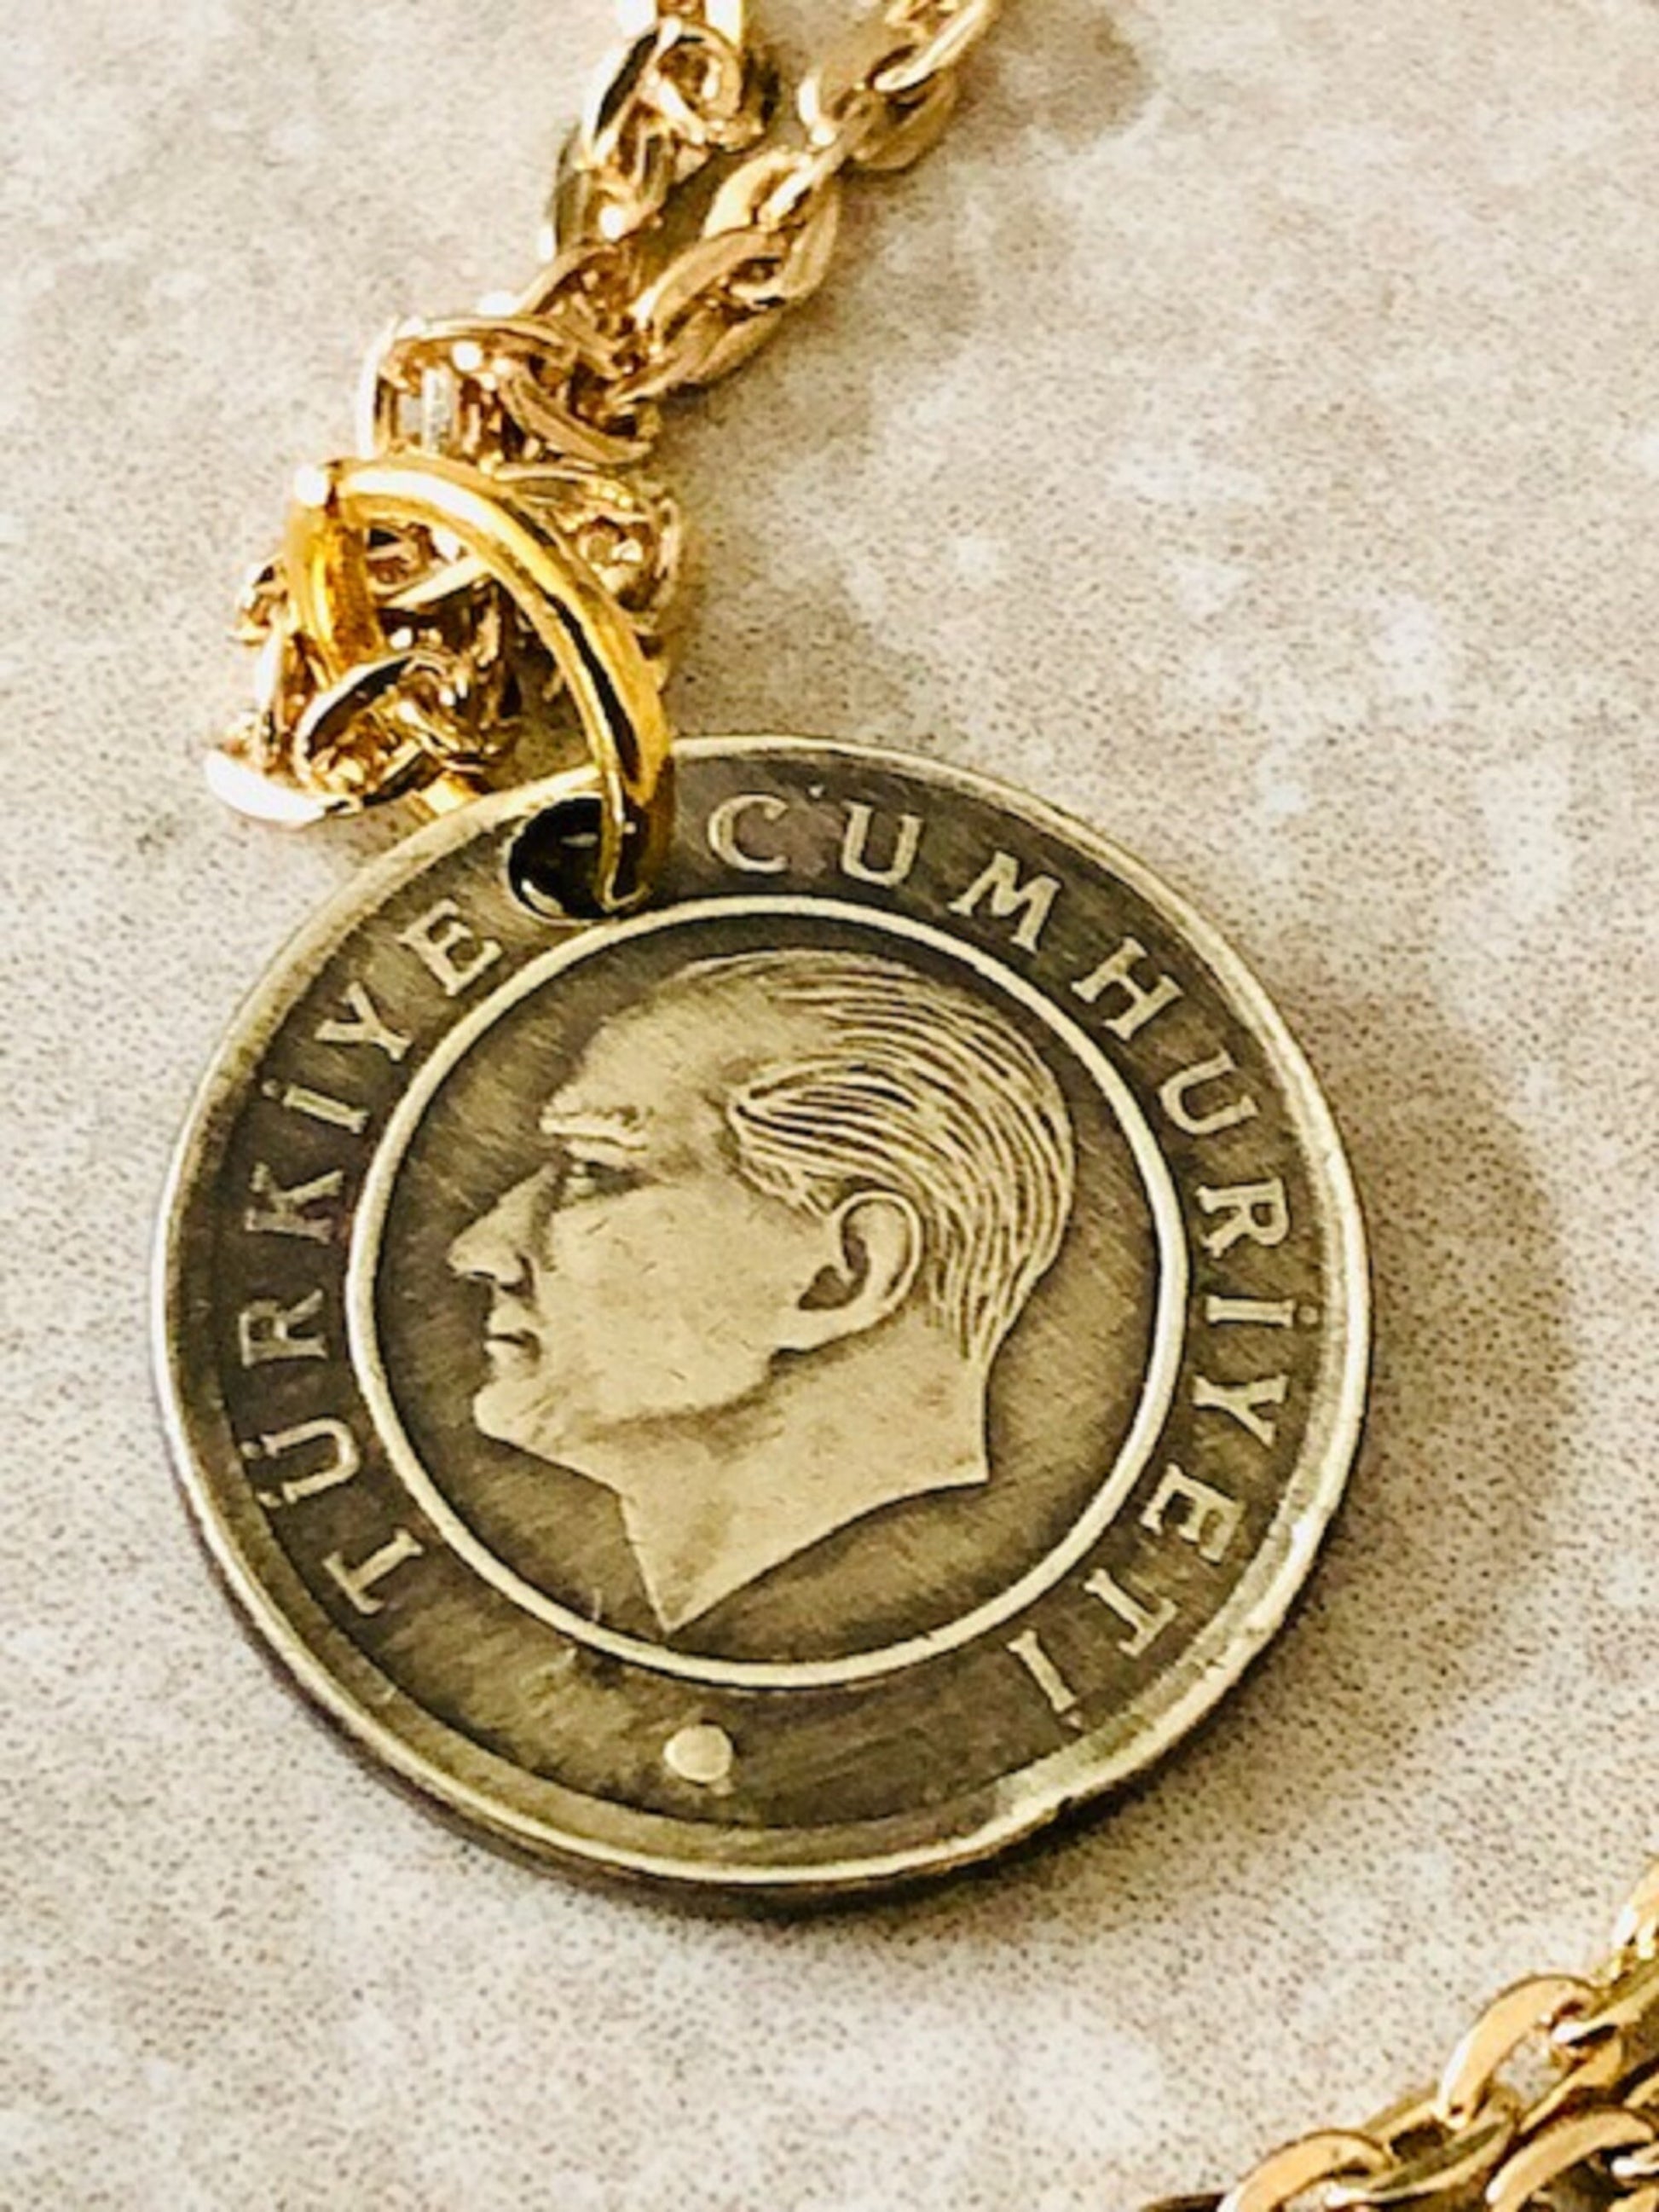 Turkey Coin Necklace Turkish 10 Kurus Pendant Personal Old Vintage Handmade Jewelry Gift Friend Charm For Him Her World Coin Collector